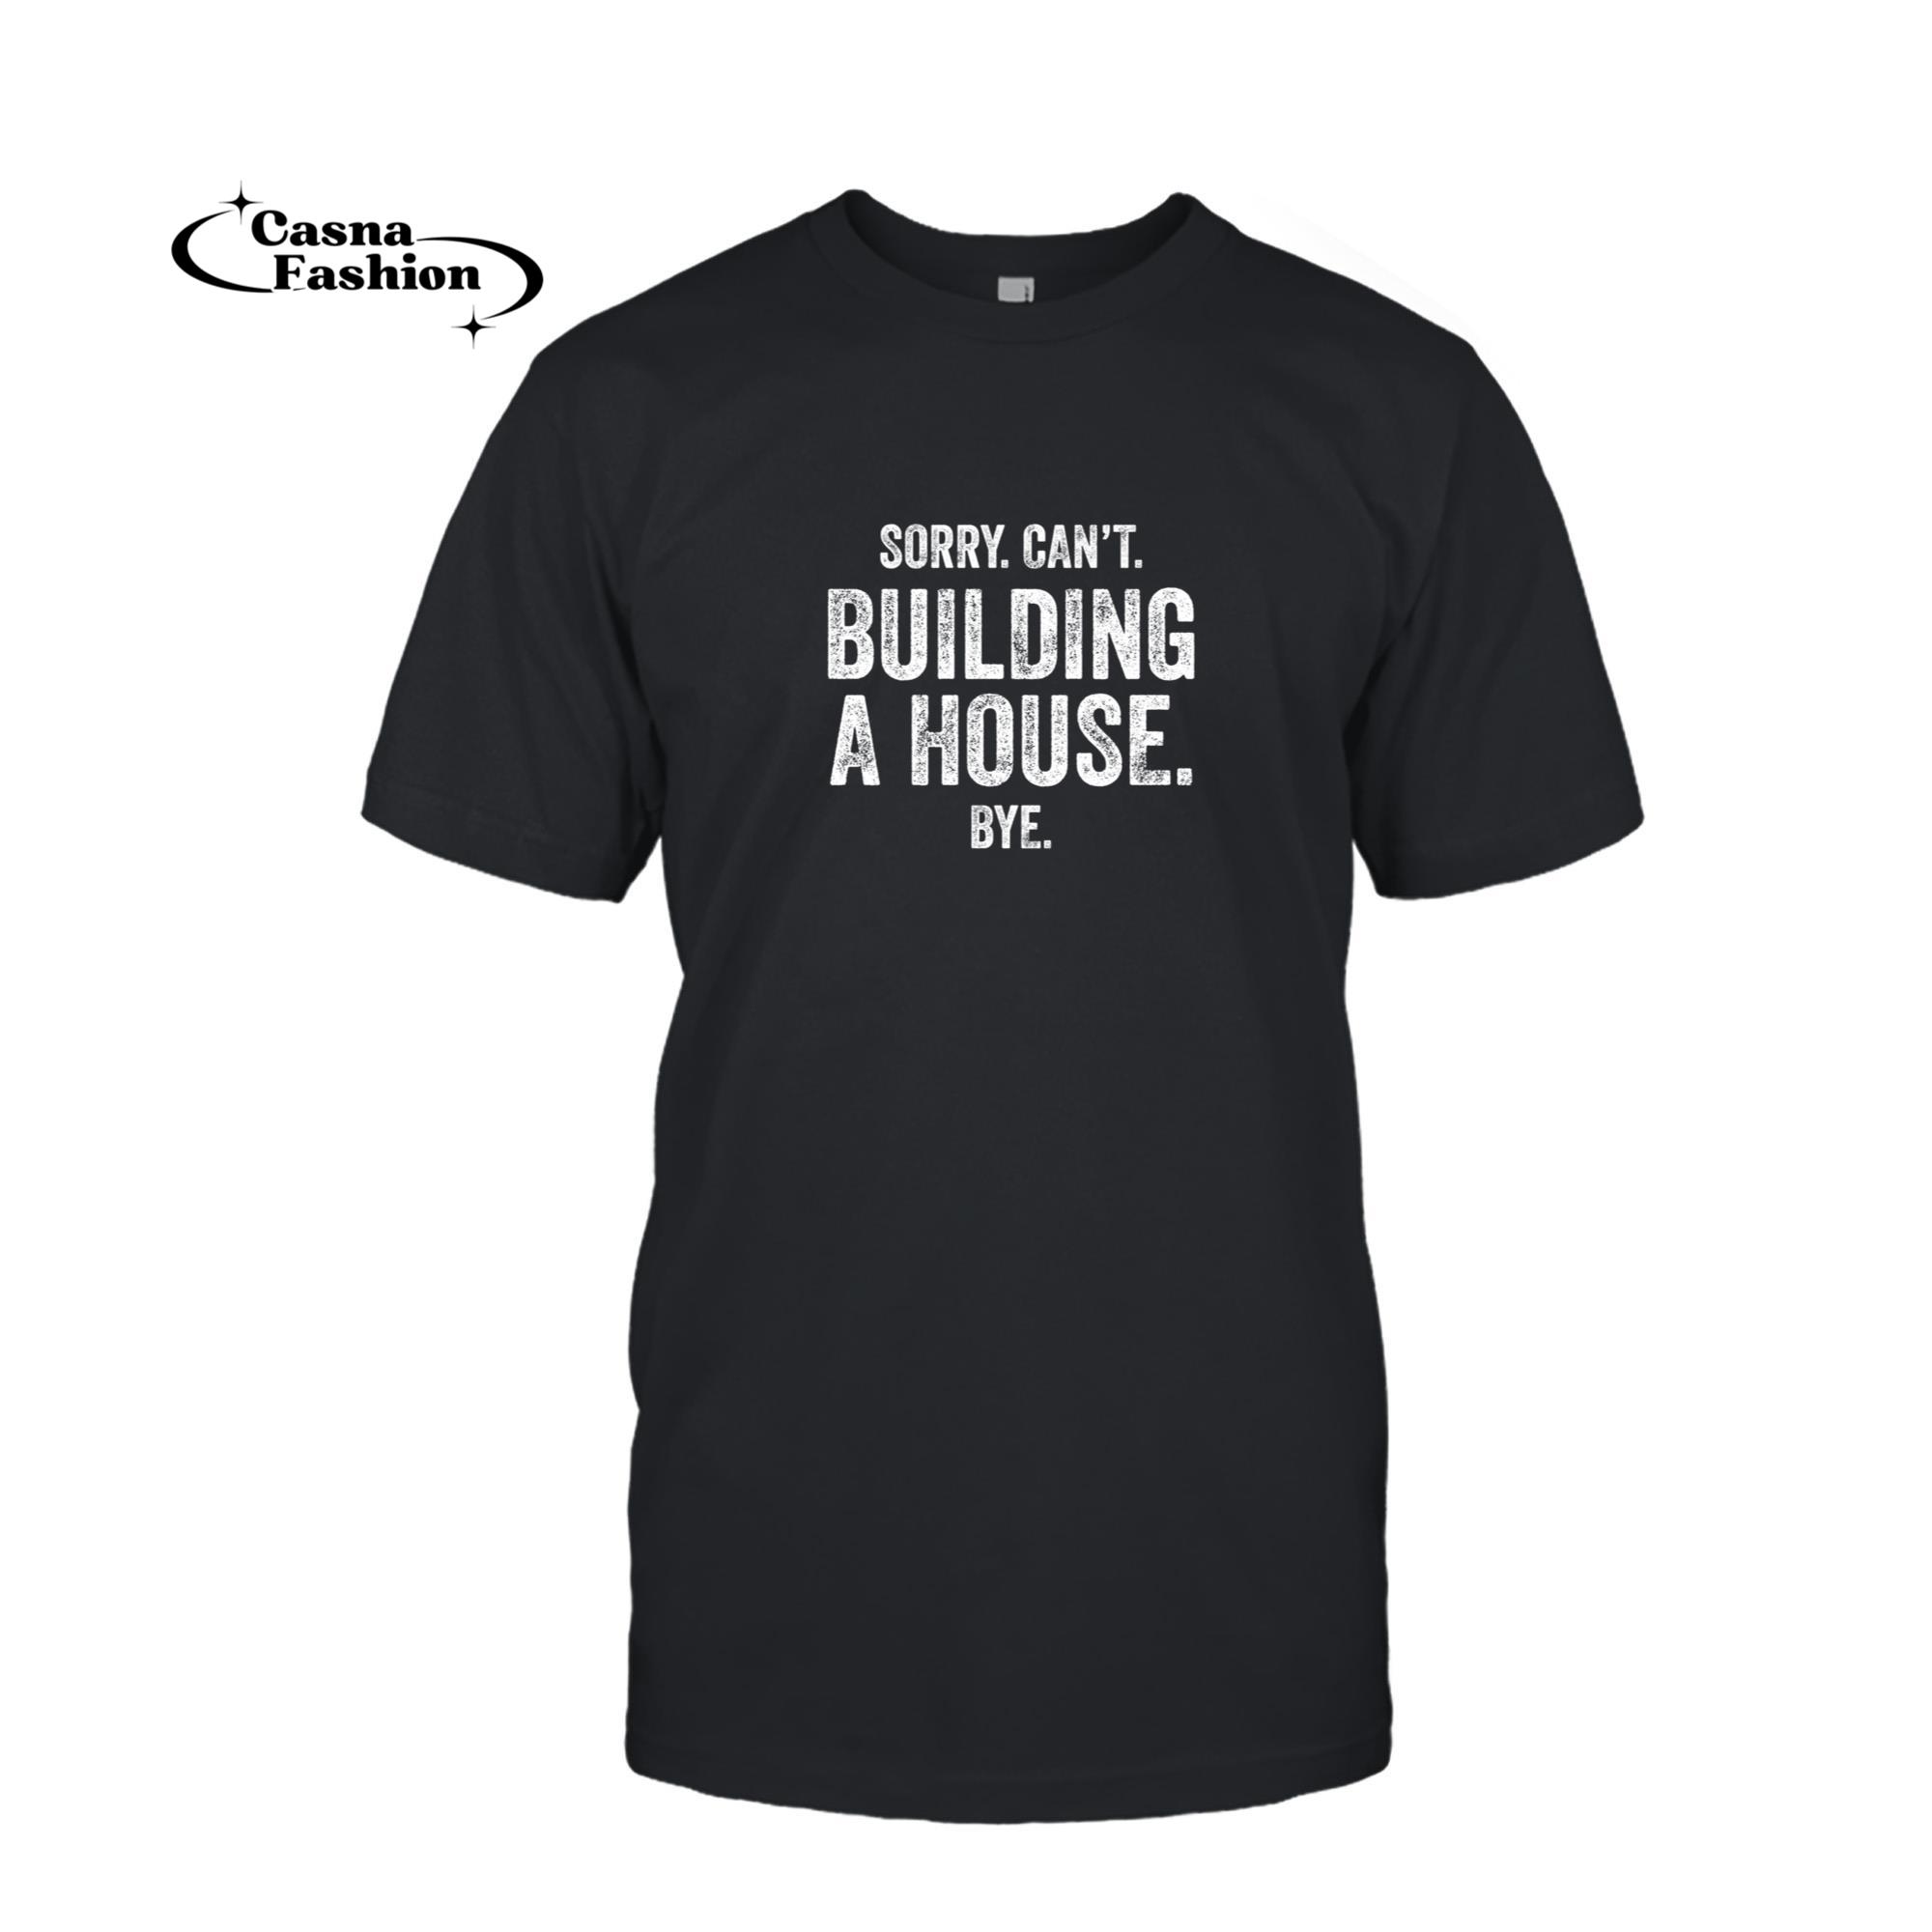 casnafashion_T-shirt_House Builder Carpenter Contractor Pullover Hoodie_T-shirt_Black